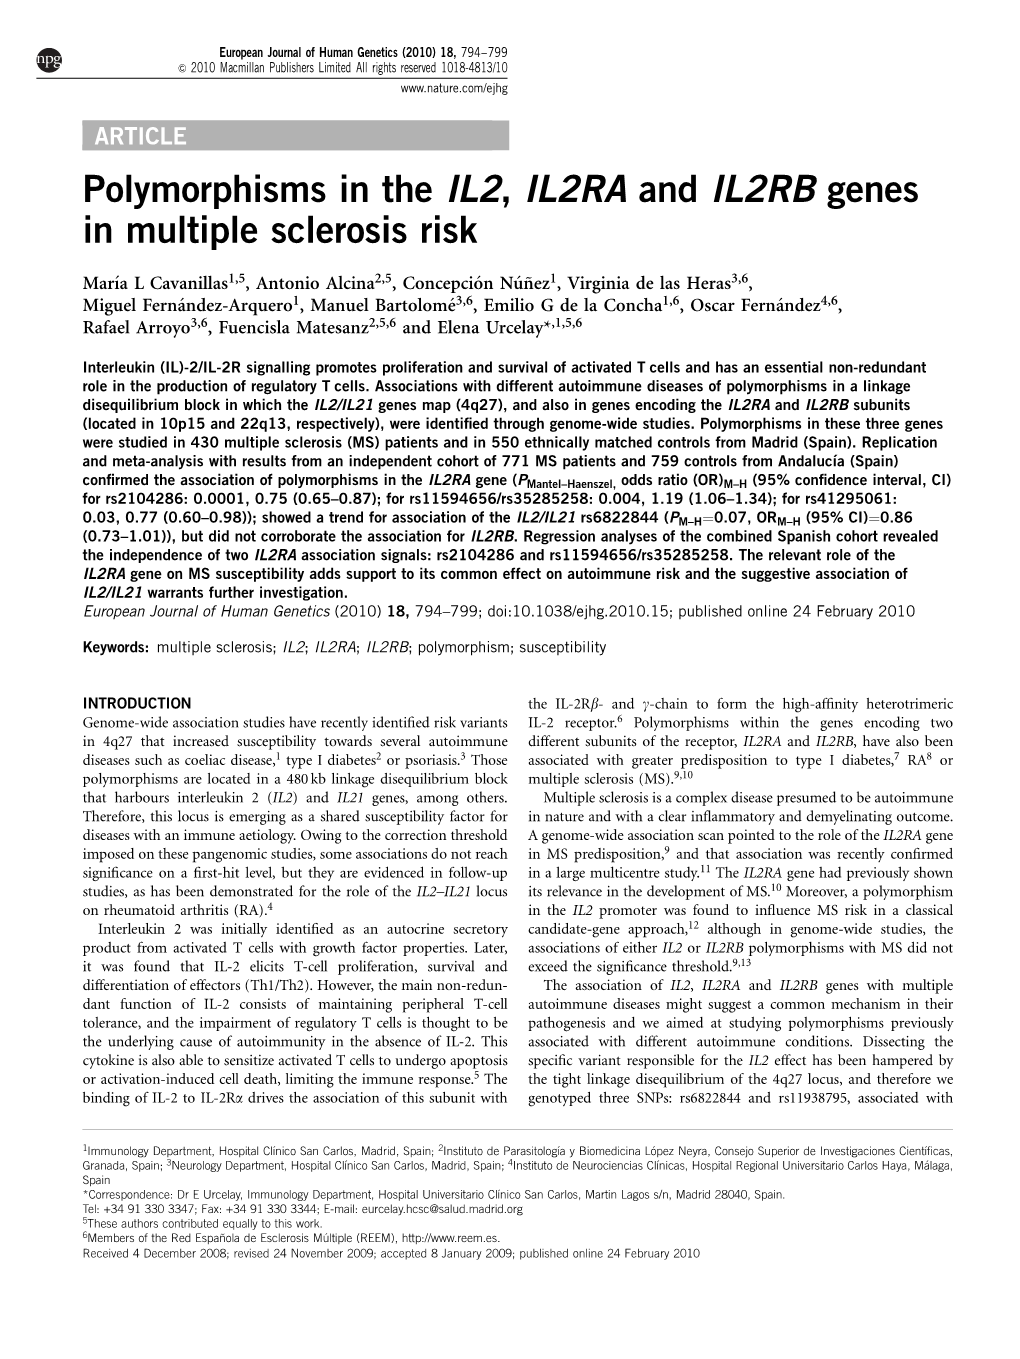 Polymorphisms in the IL2, IL2RA and IL2RB Genes in Multiple Sclerosis Risk